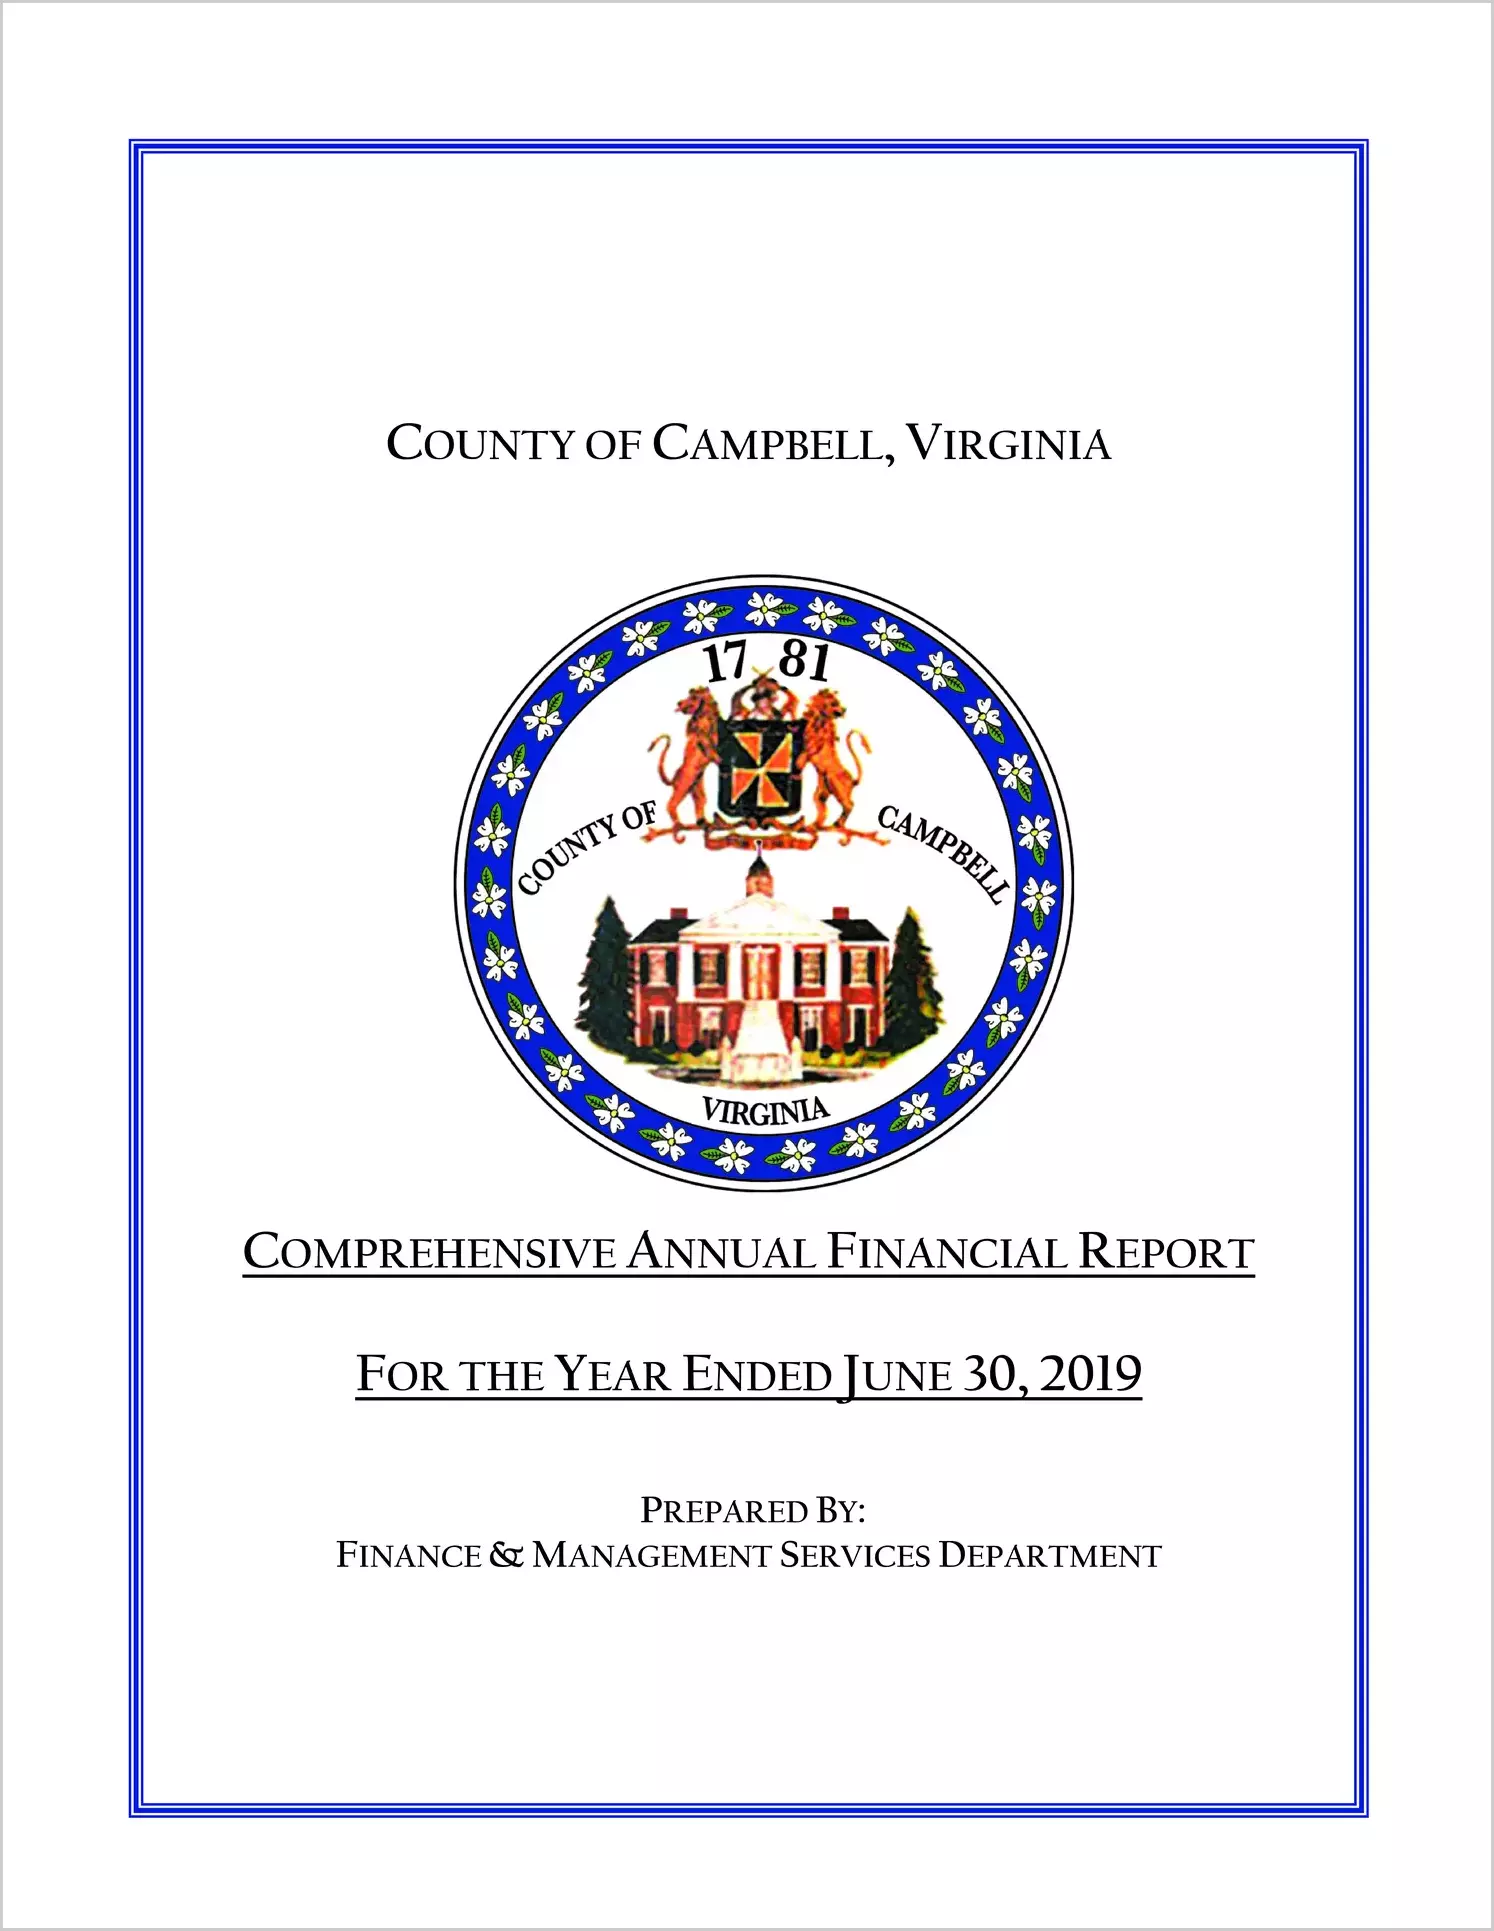 2019 Annual Financial Report for County of Campbell